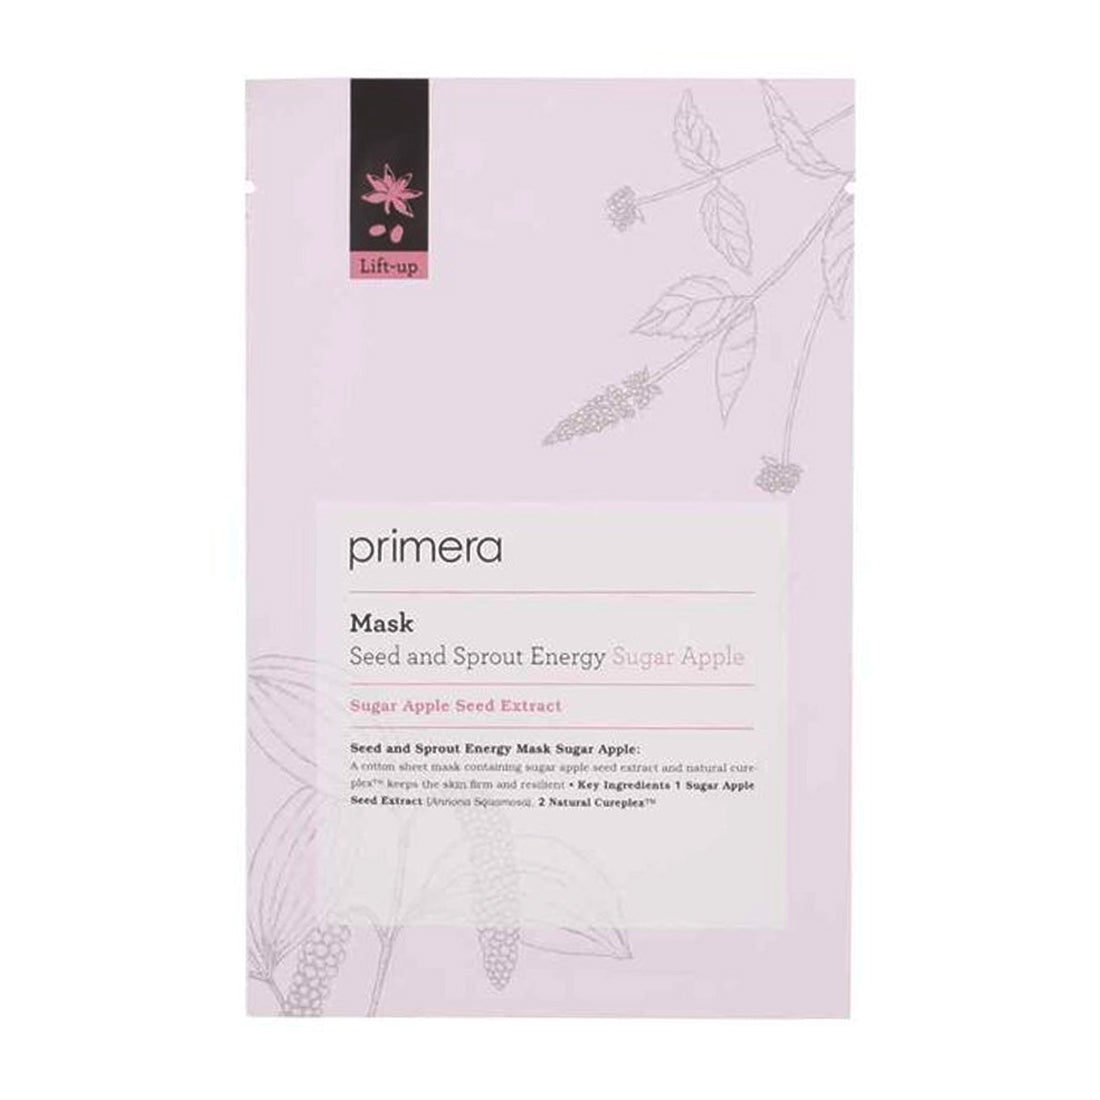 Primera Seed and Sprout Energy Mask Sugar Apple 5ea - Dodoskin